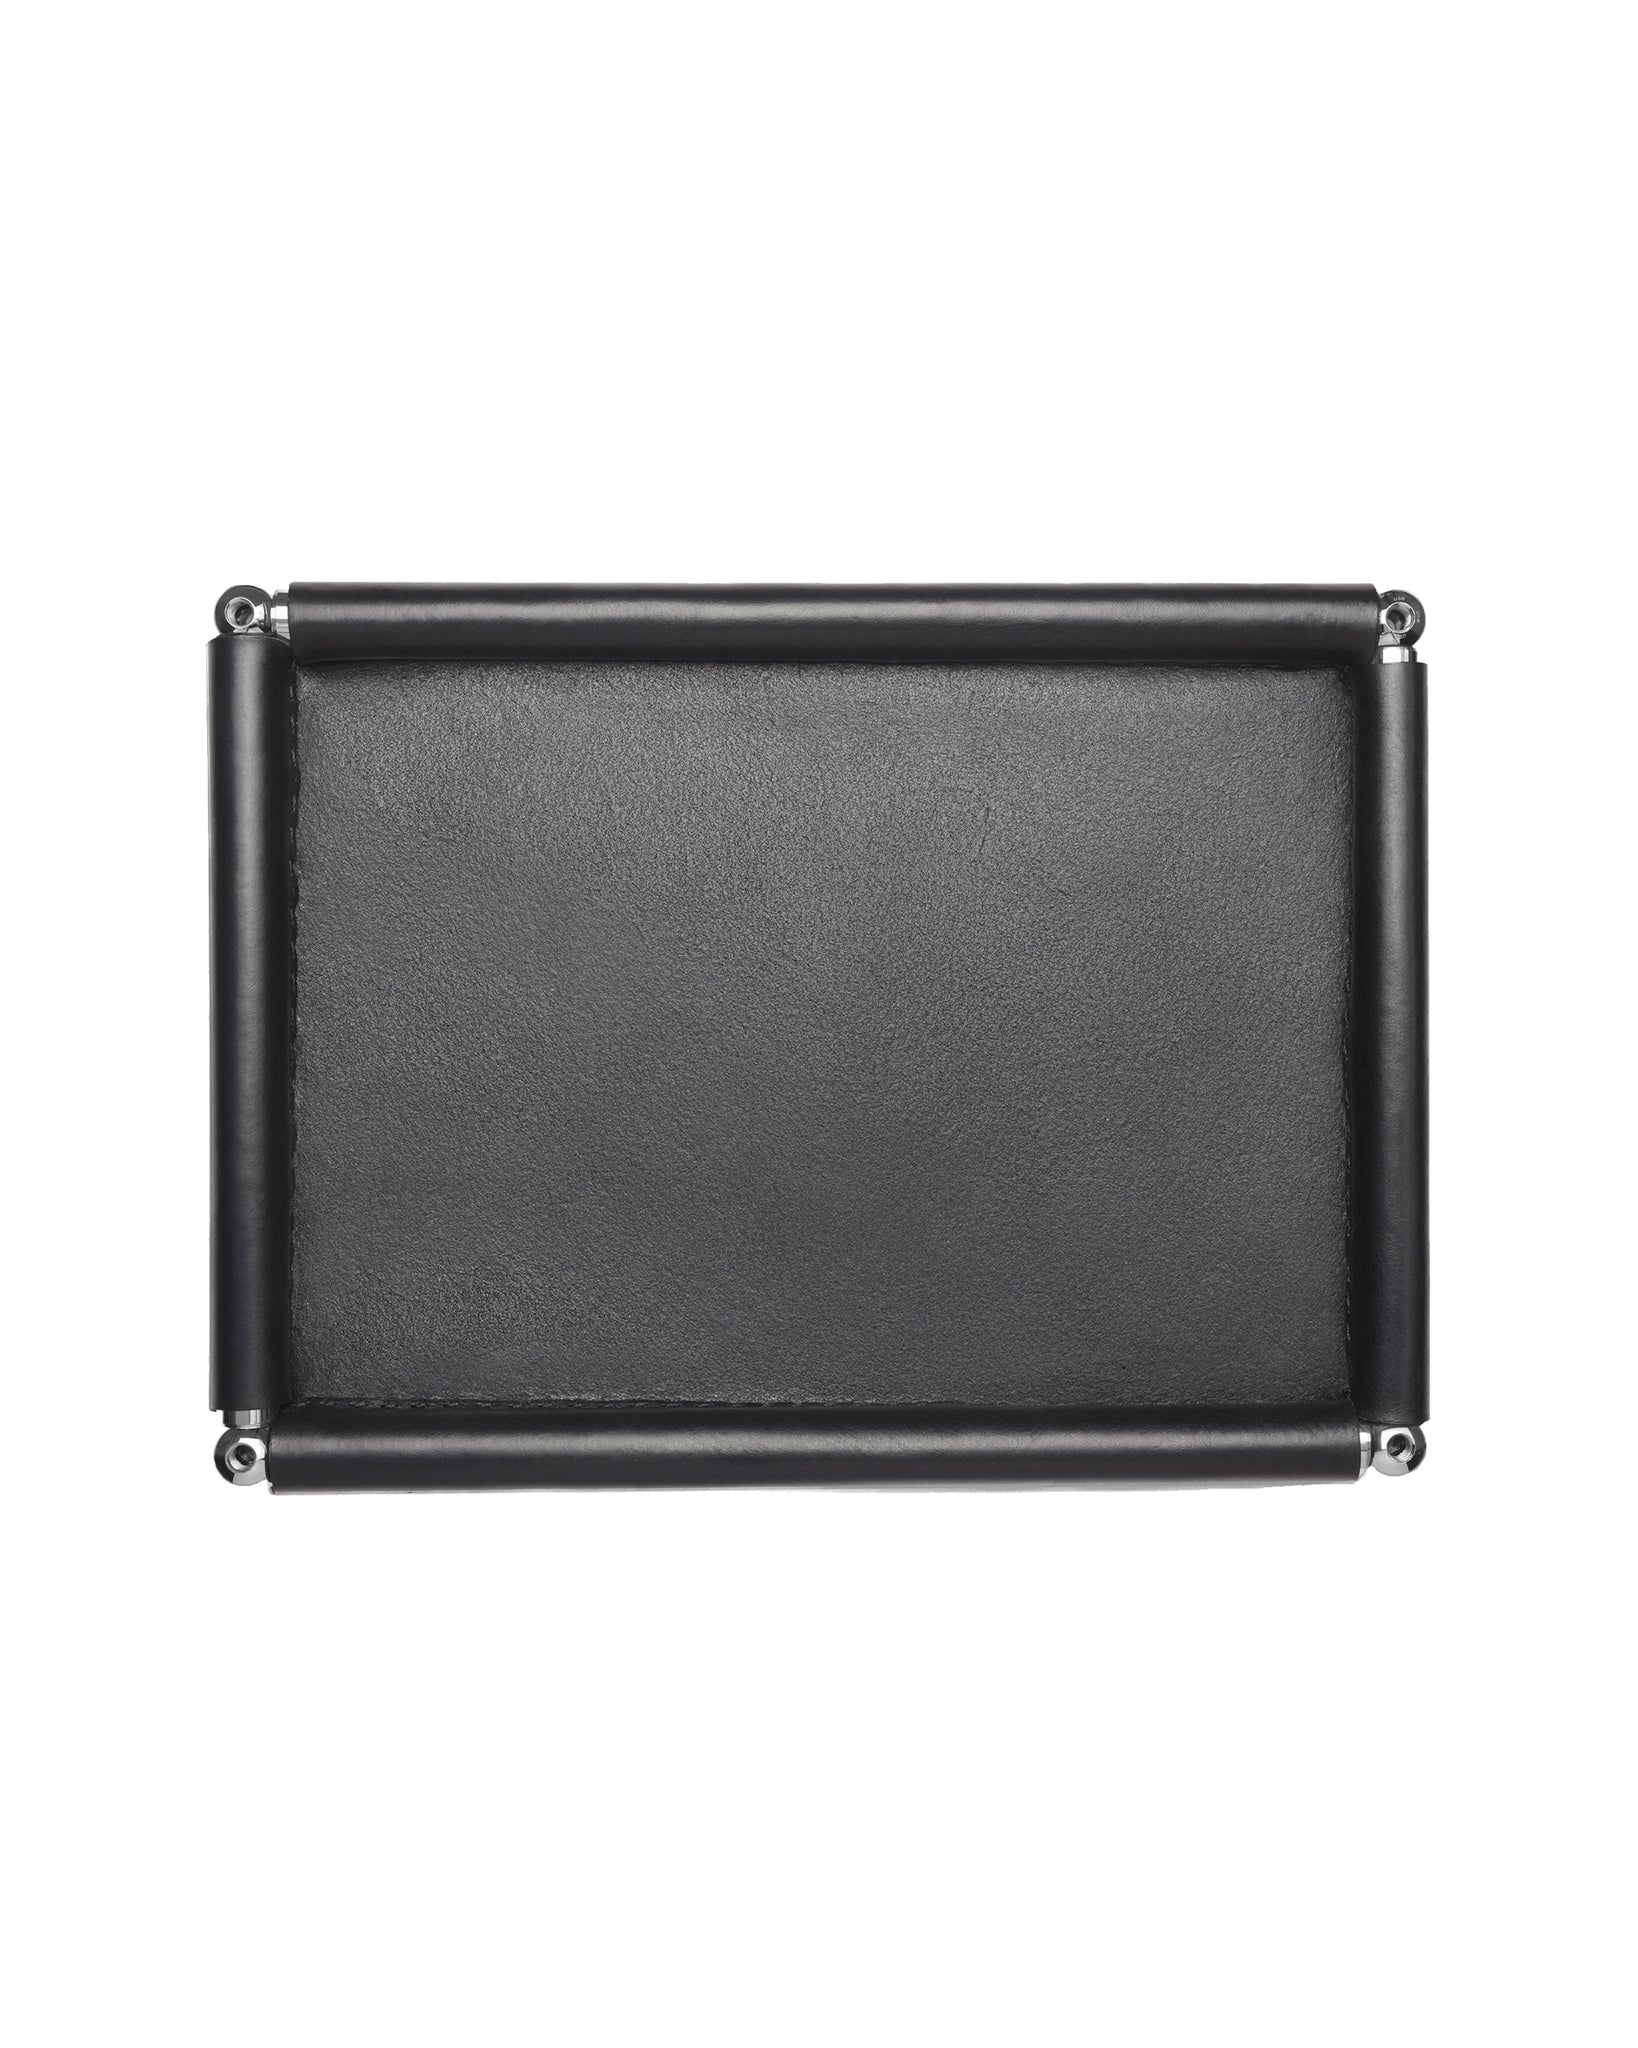 Genuine Black Leather Valet Tray with USM Modular Furniture Components - Large